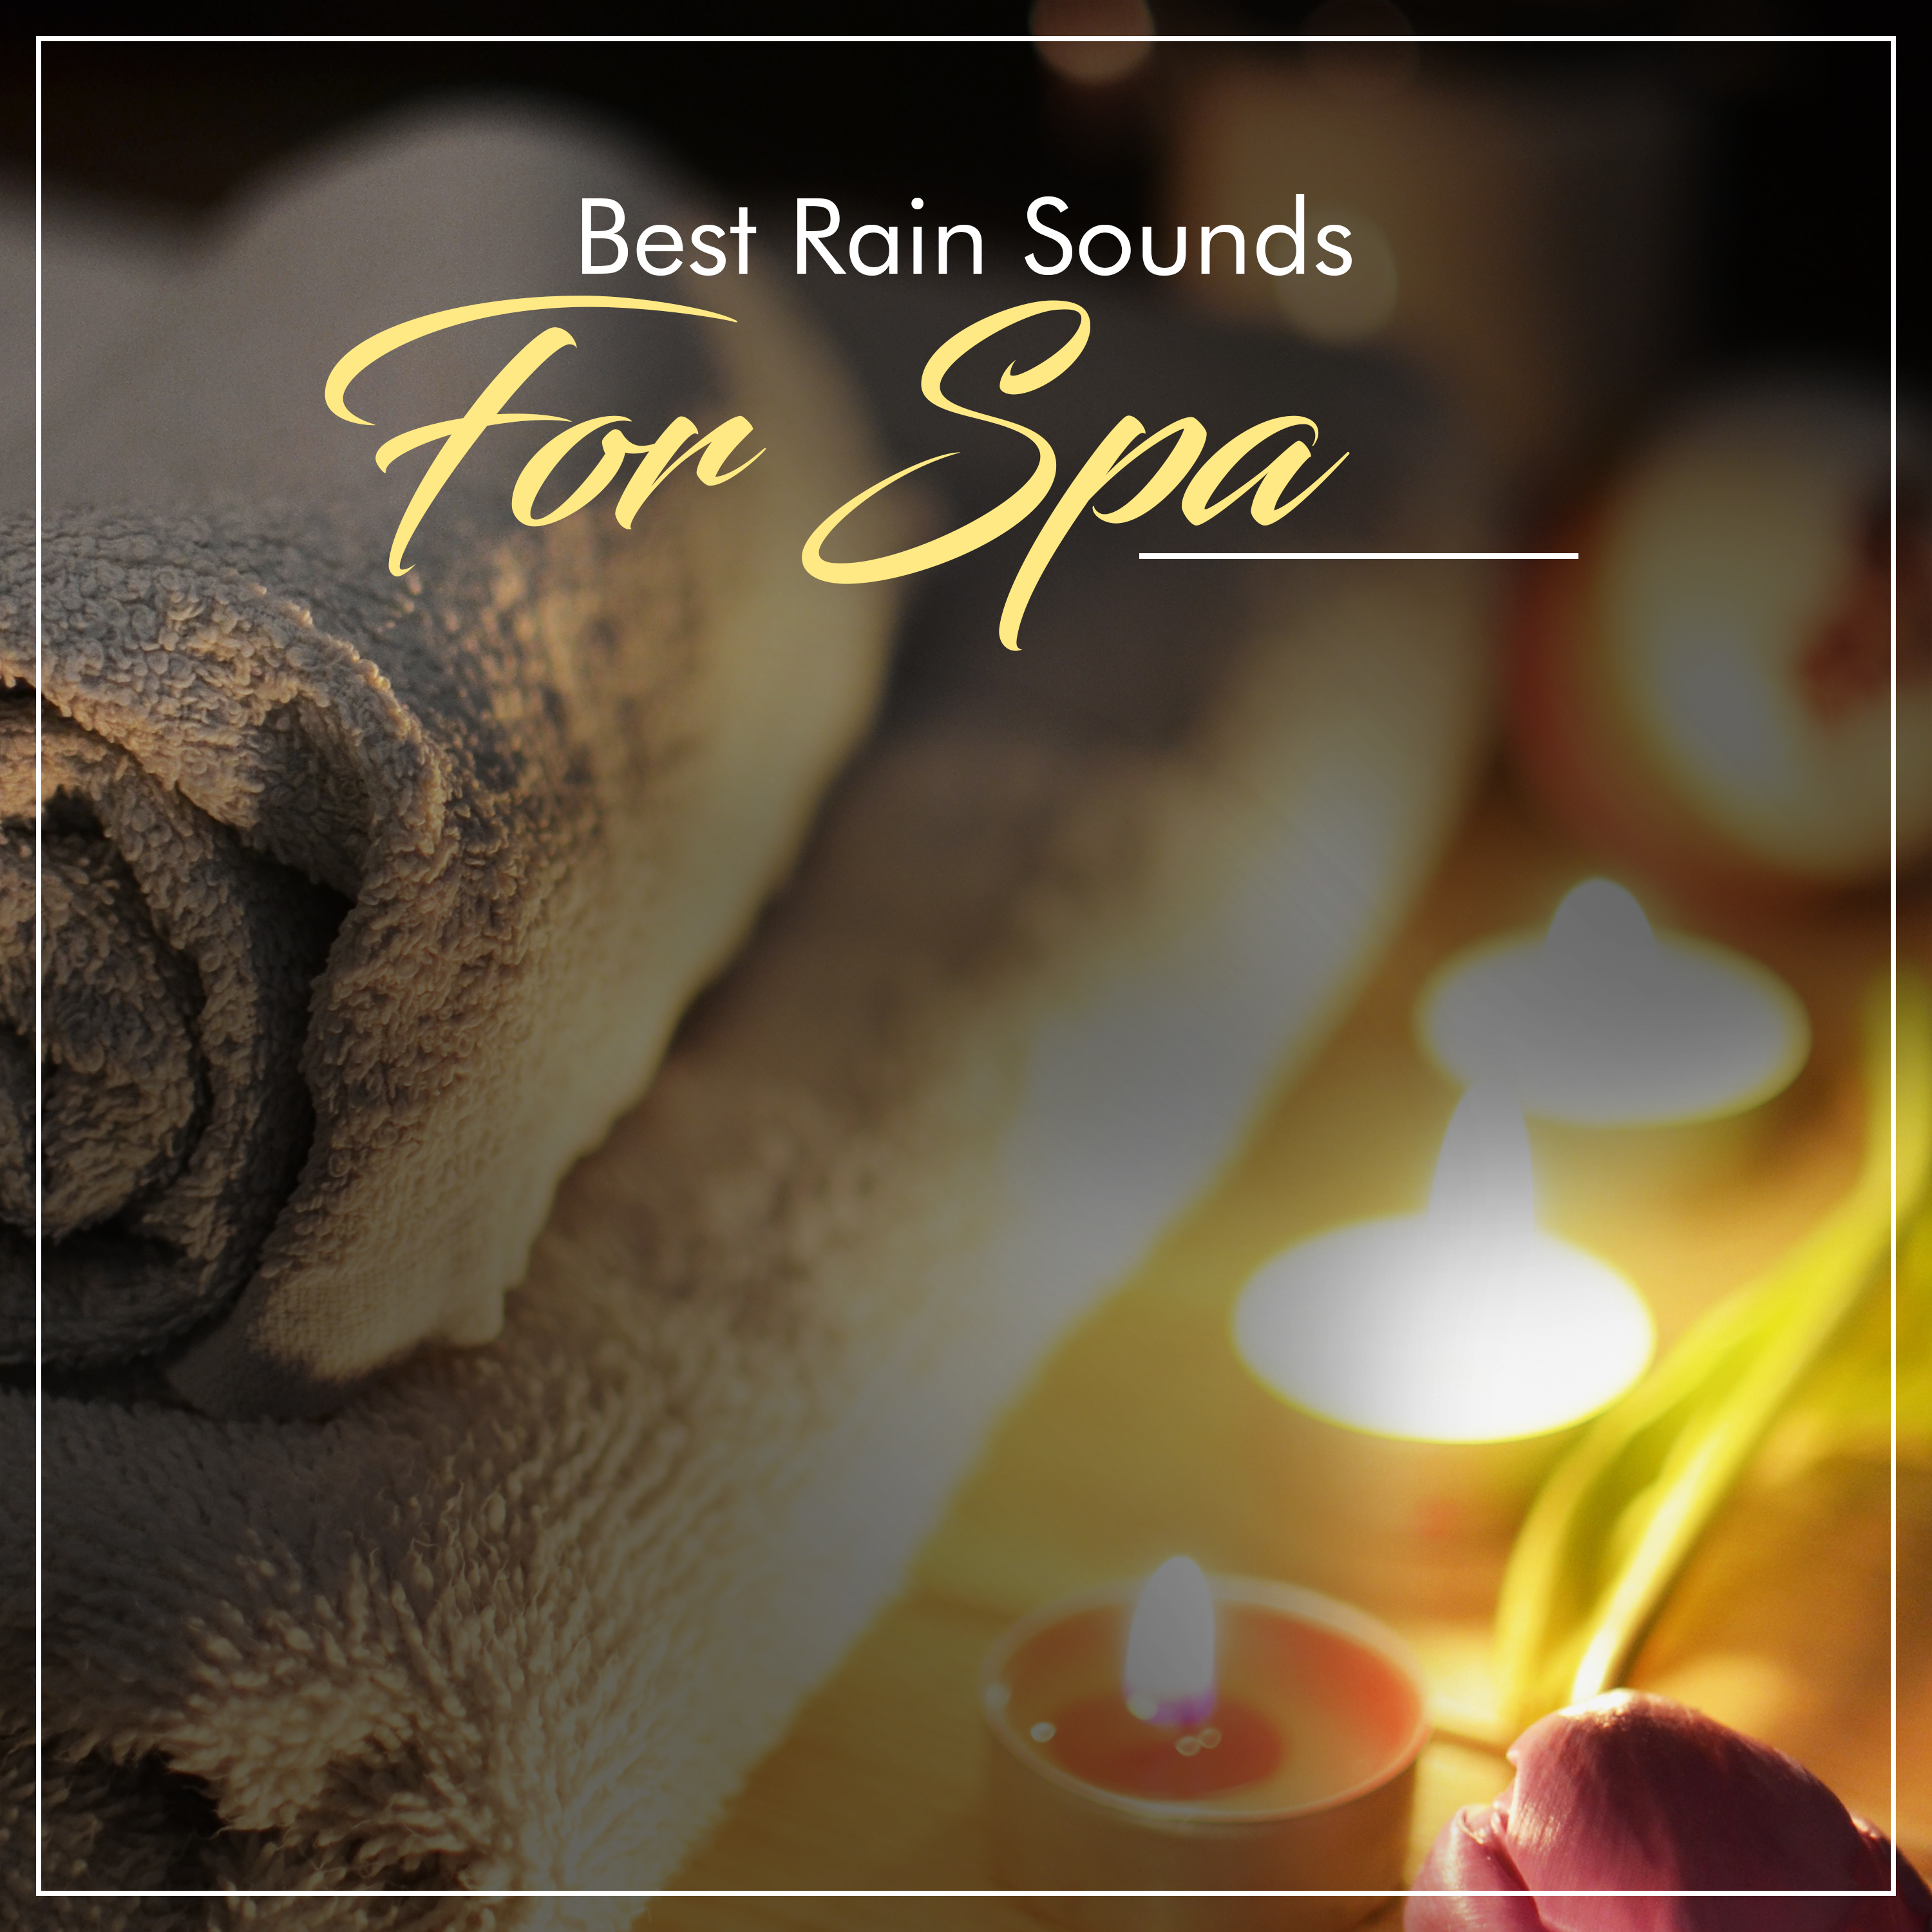 17 Rain Spa Thunder Storm Sounds: Loopable Ambience